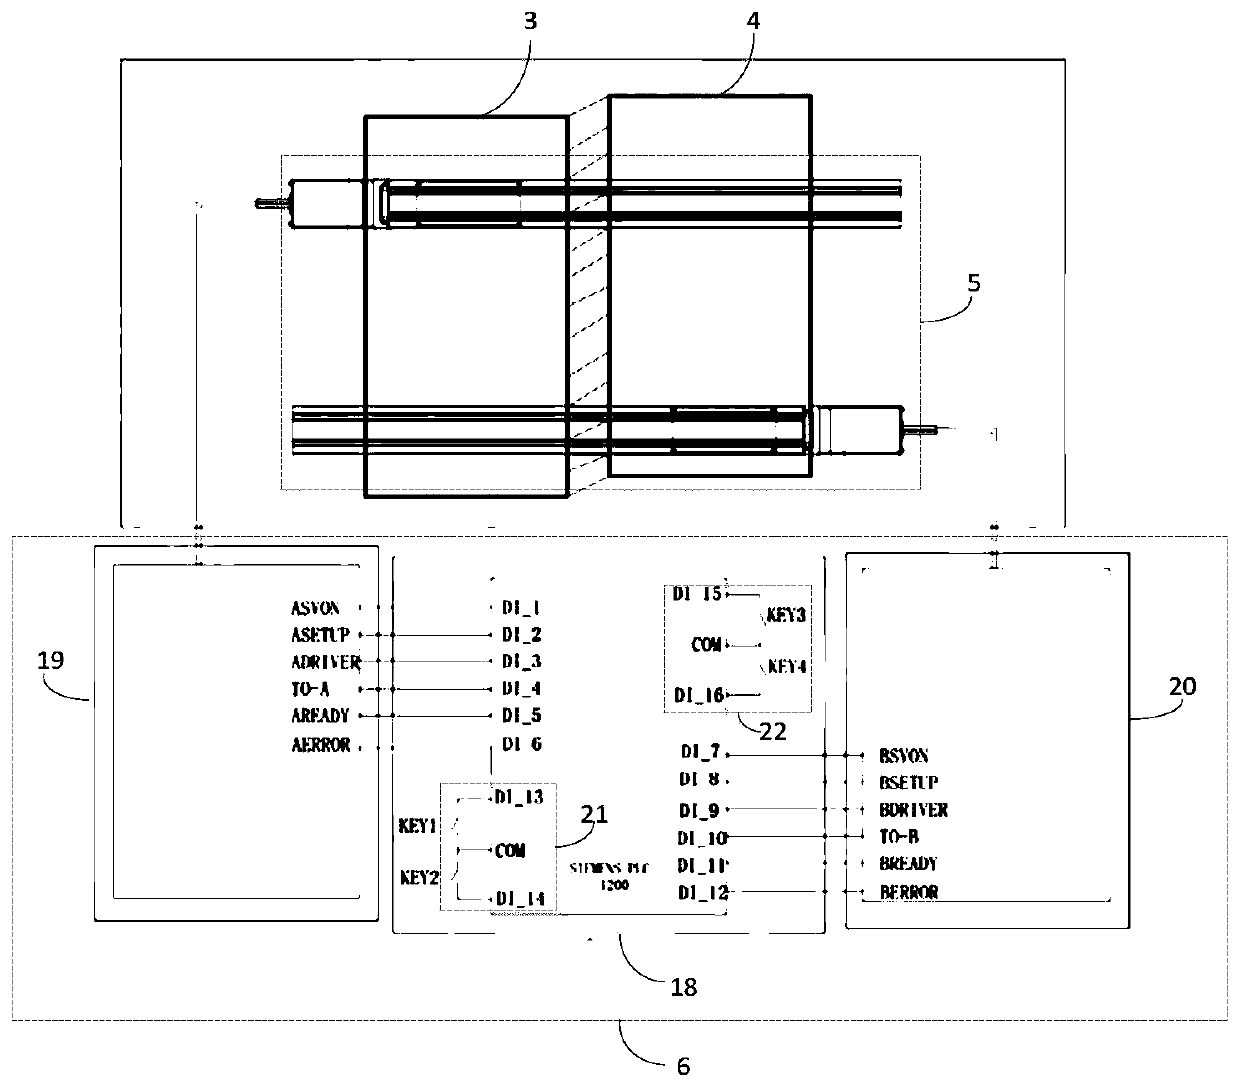 Double-table-board exposure machine and method for controlling opening and closing of door of double-table-board exposure machine